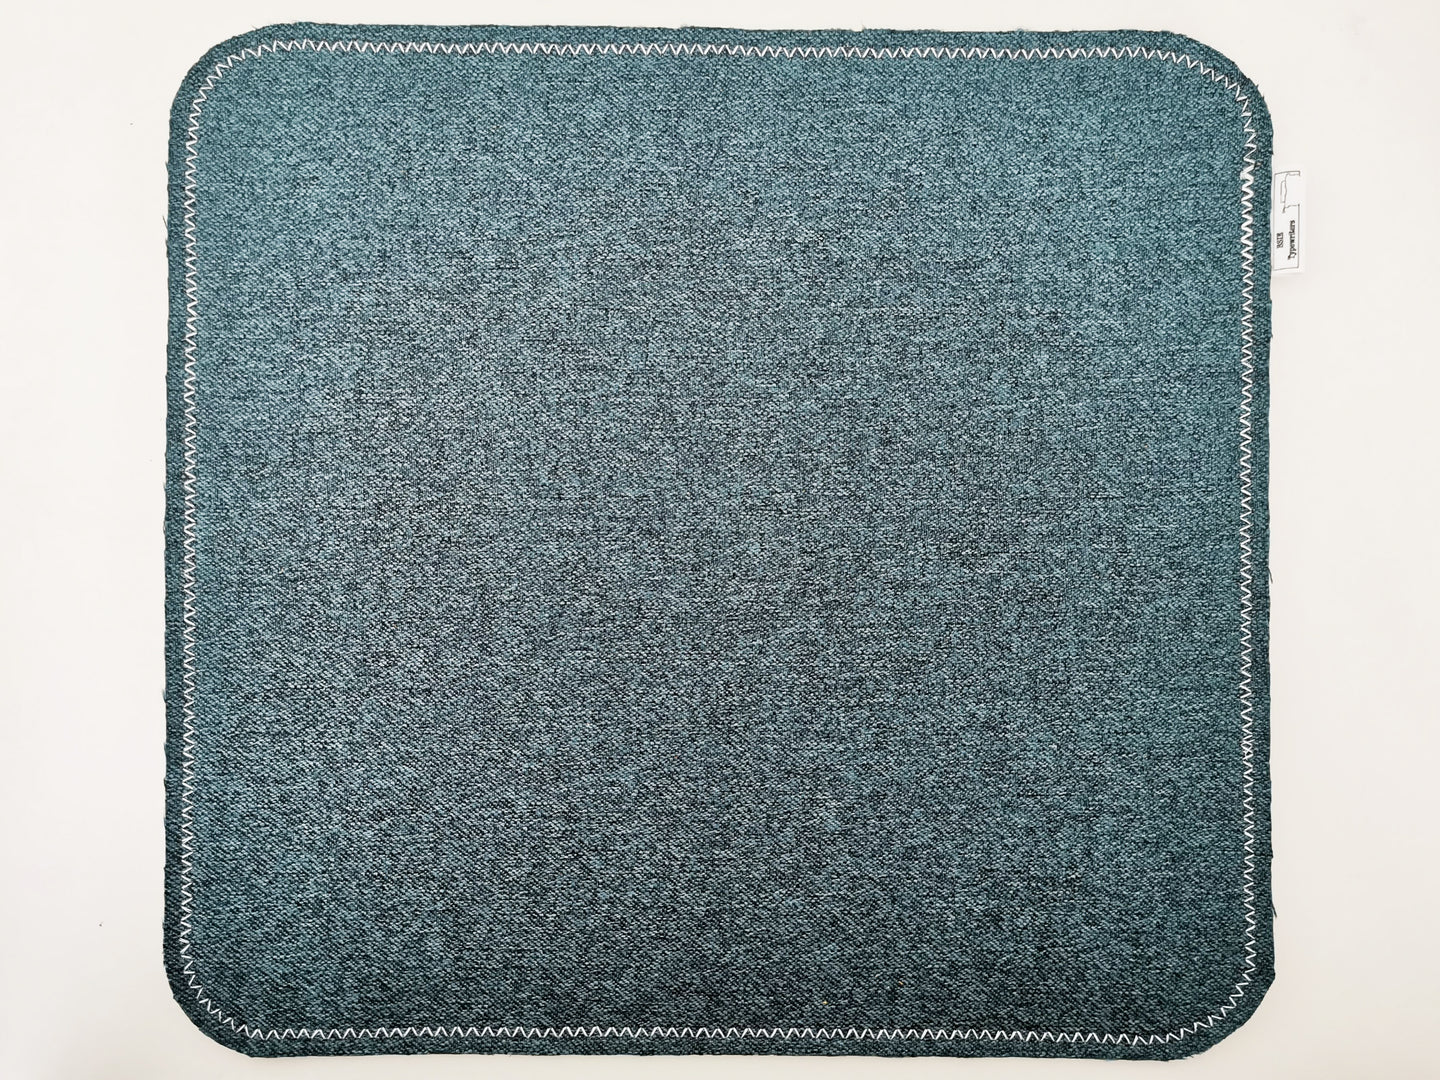 Typewriter Pad - Dampening Sound And Providing a Non-slip surface - Blue